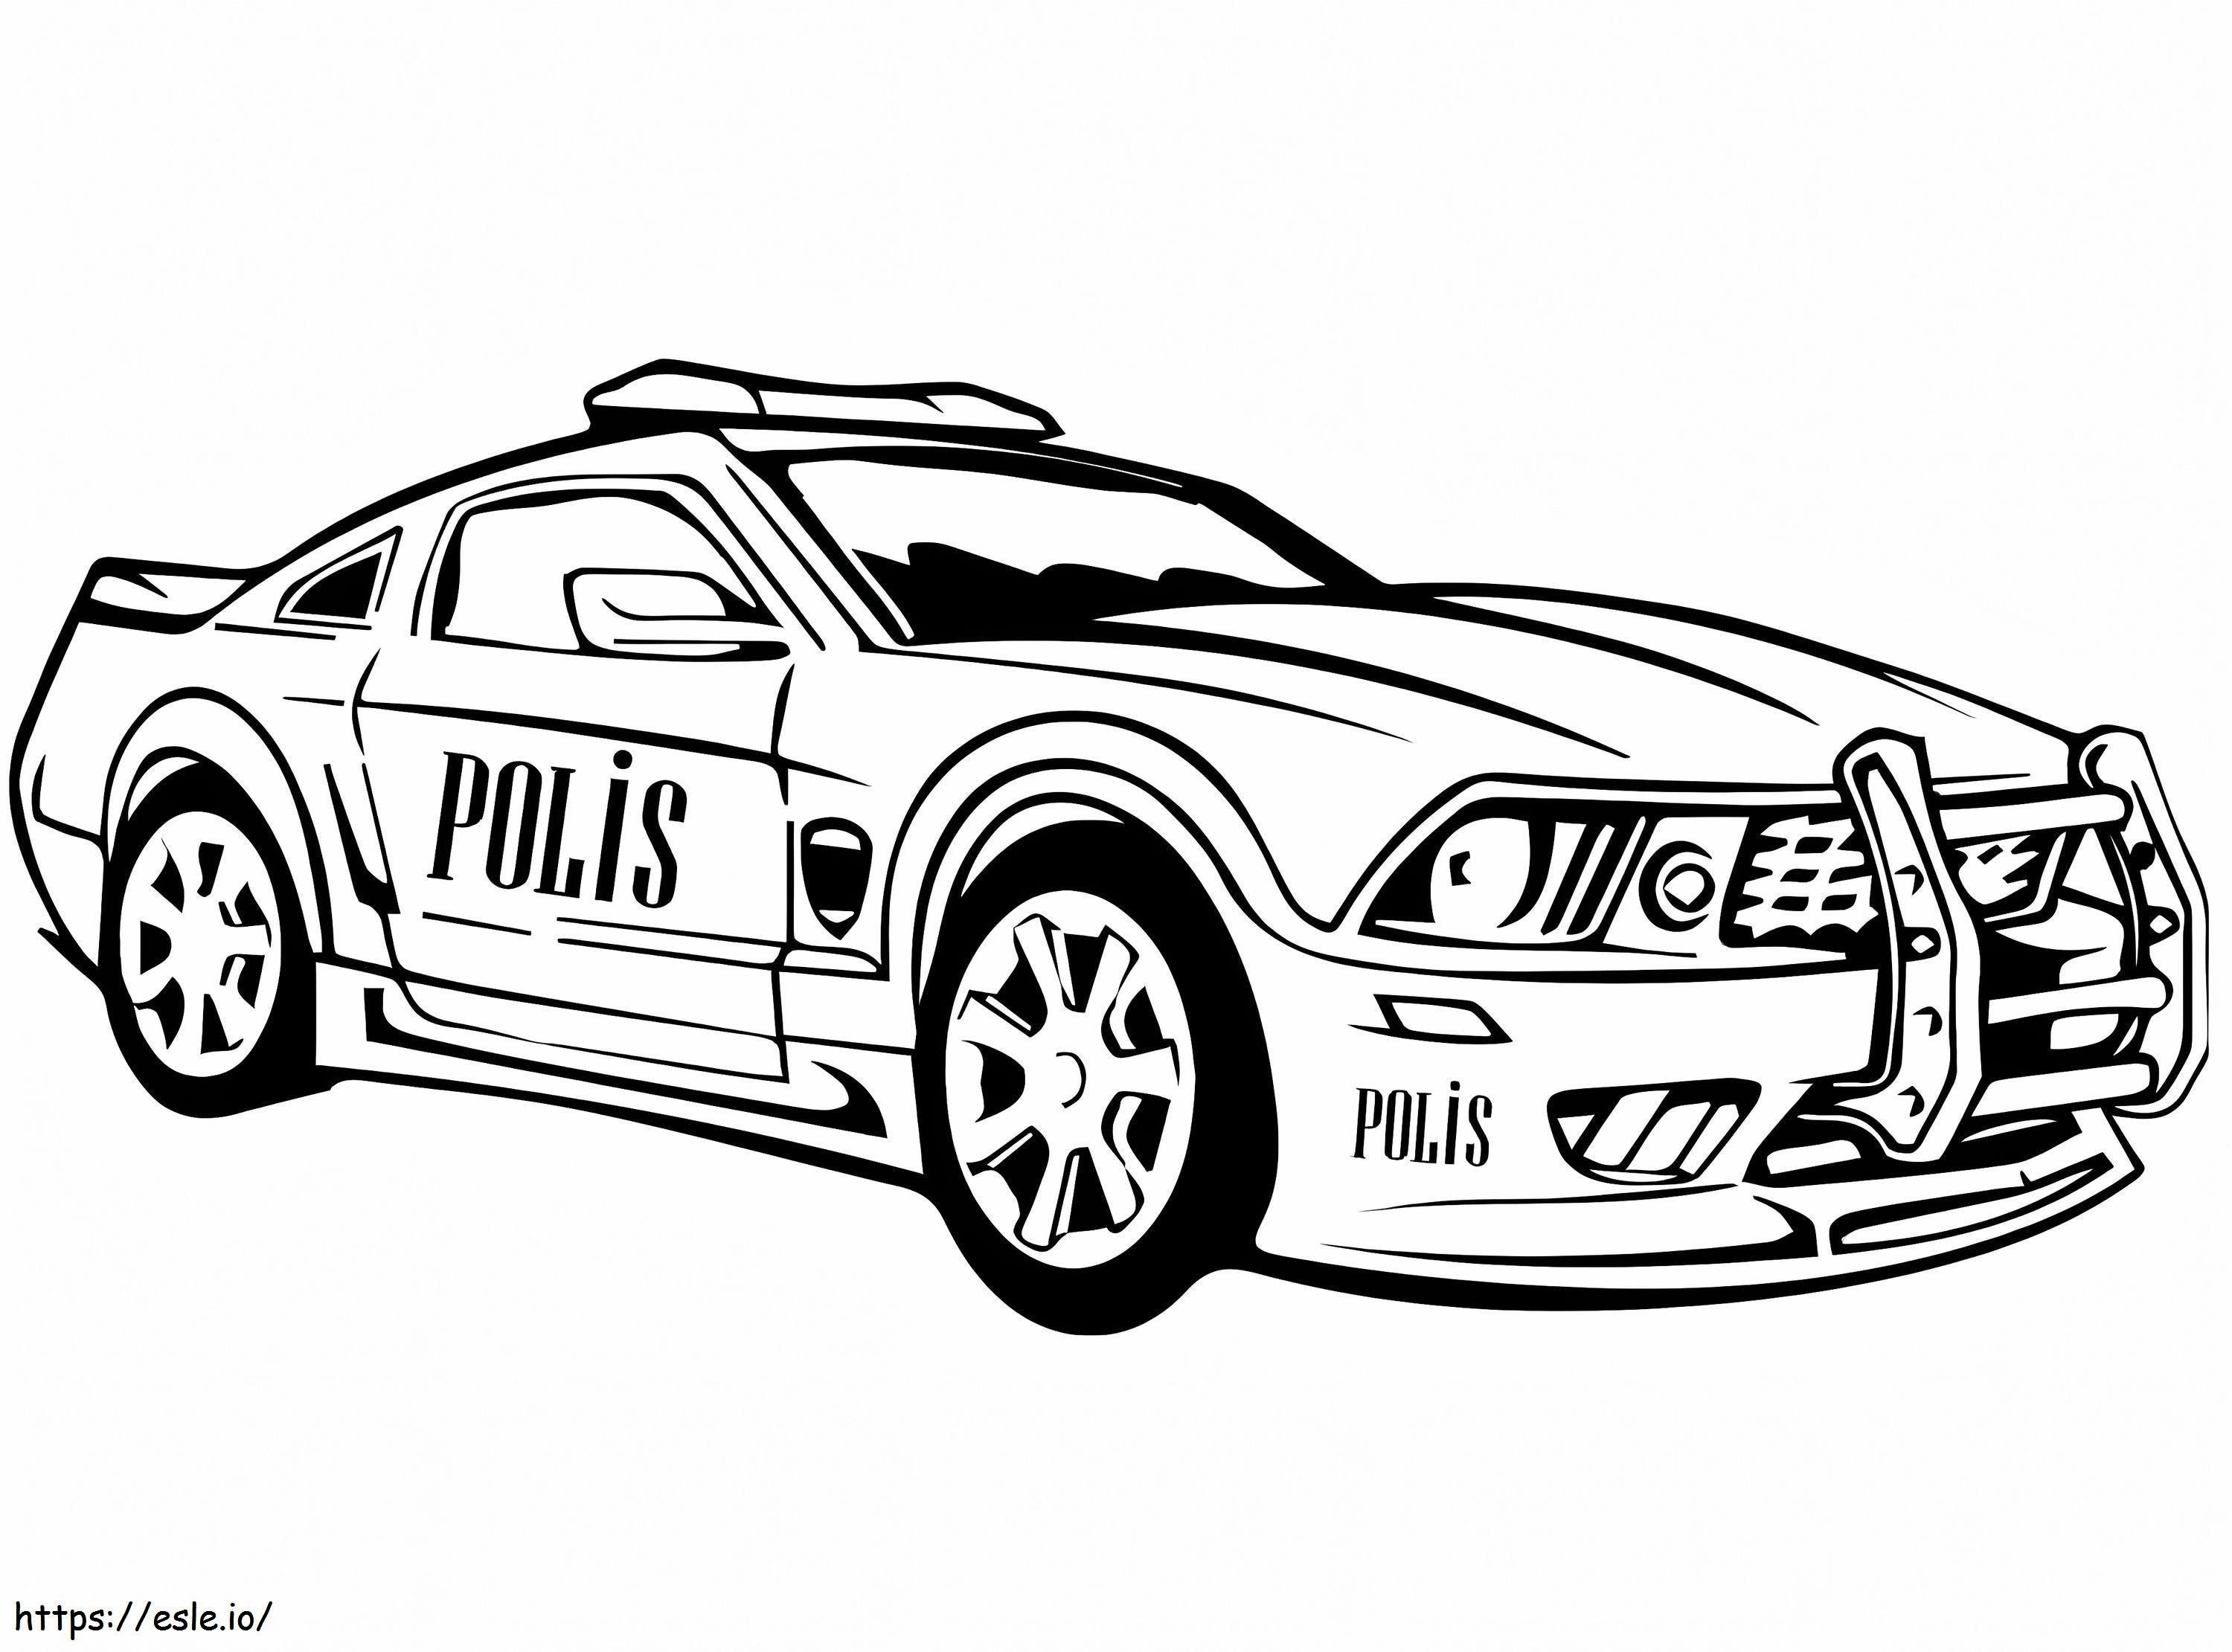 Police Car 12 coloring page